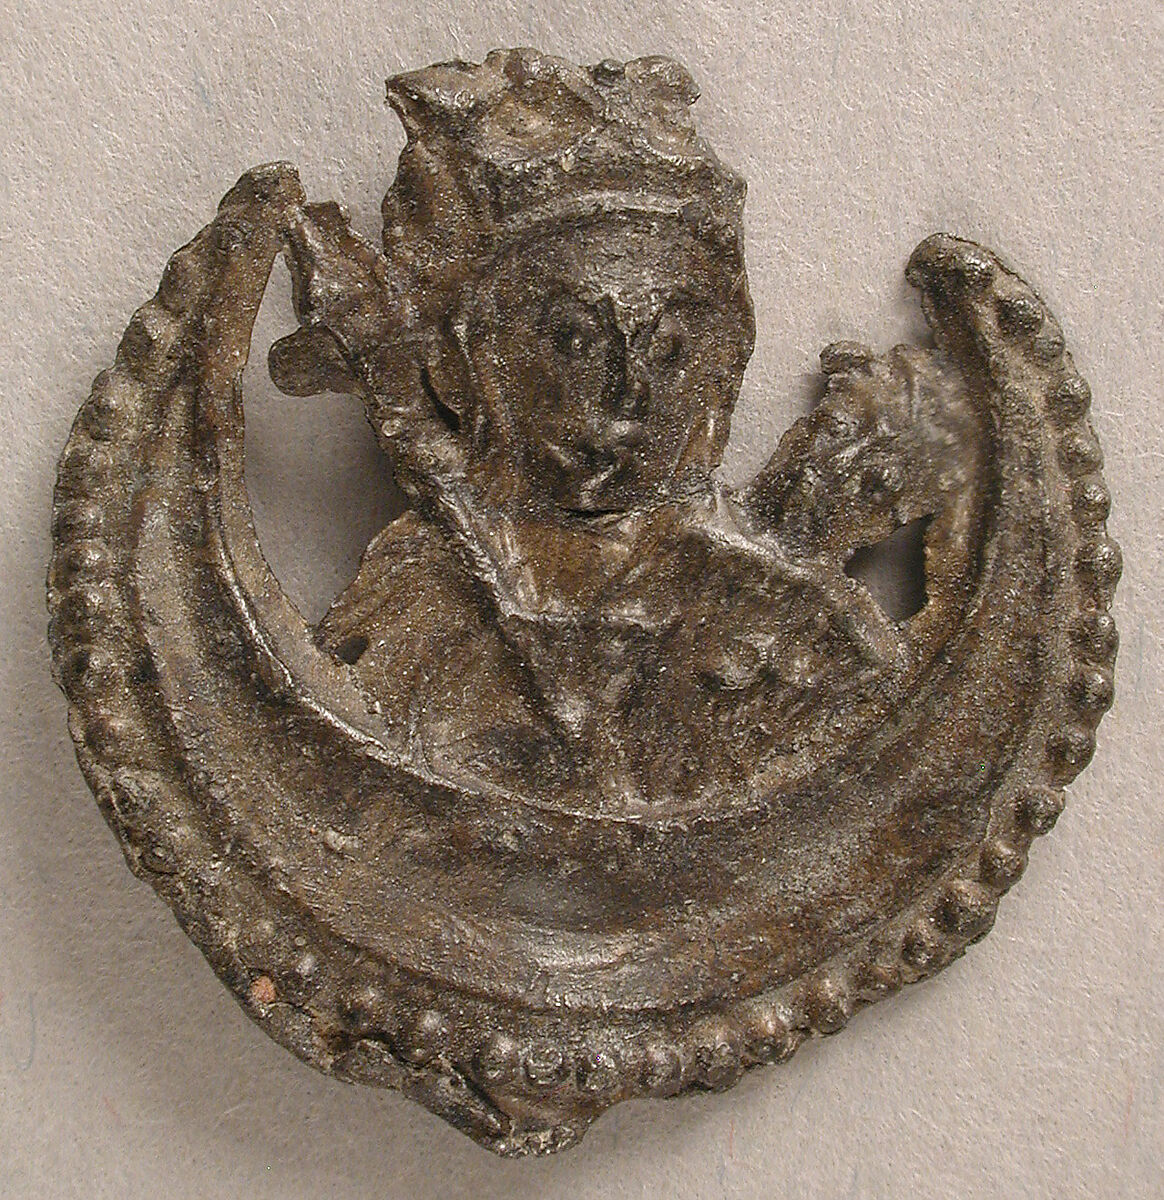 Badge with Madonna and Infant, Tin/lead alloy, British 